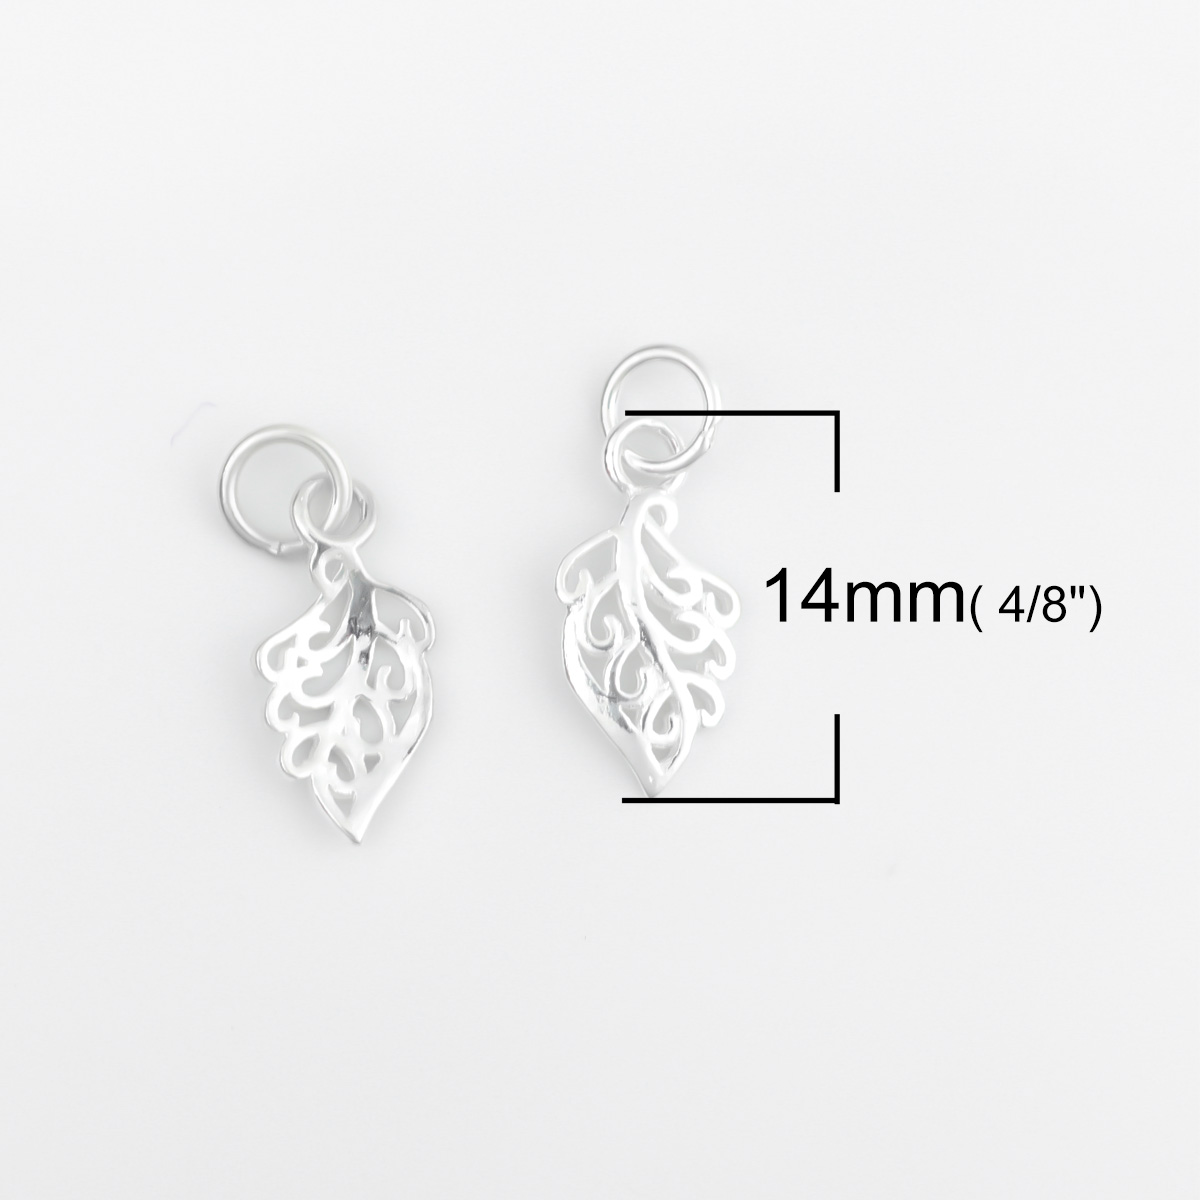 Picture of Sterling Silver Charms Silver Leaf W/ Jump Ring 17mm x 7mm, 1 Gram (Approx 2-3 PCs)